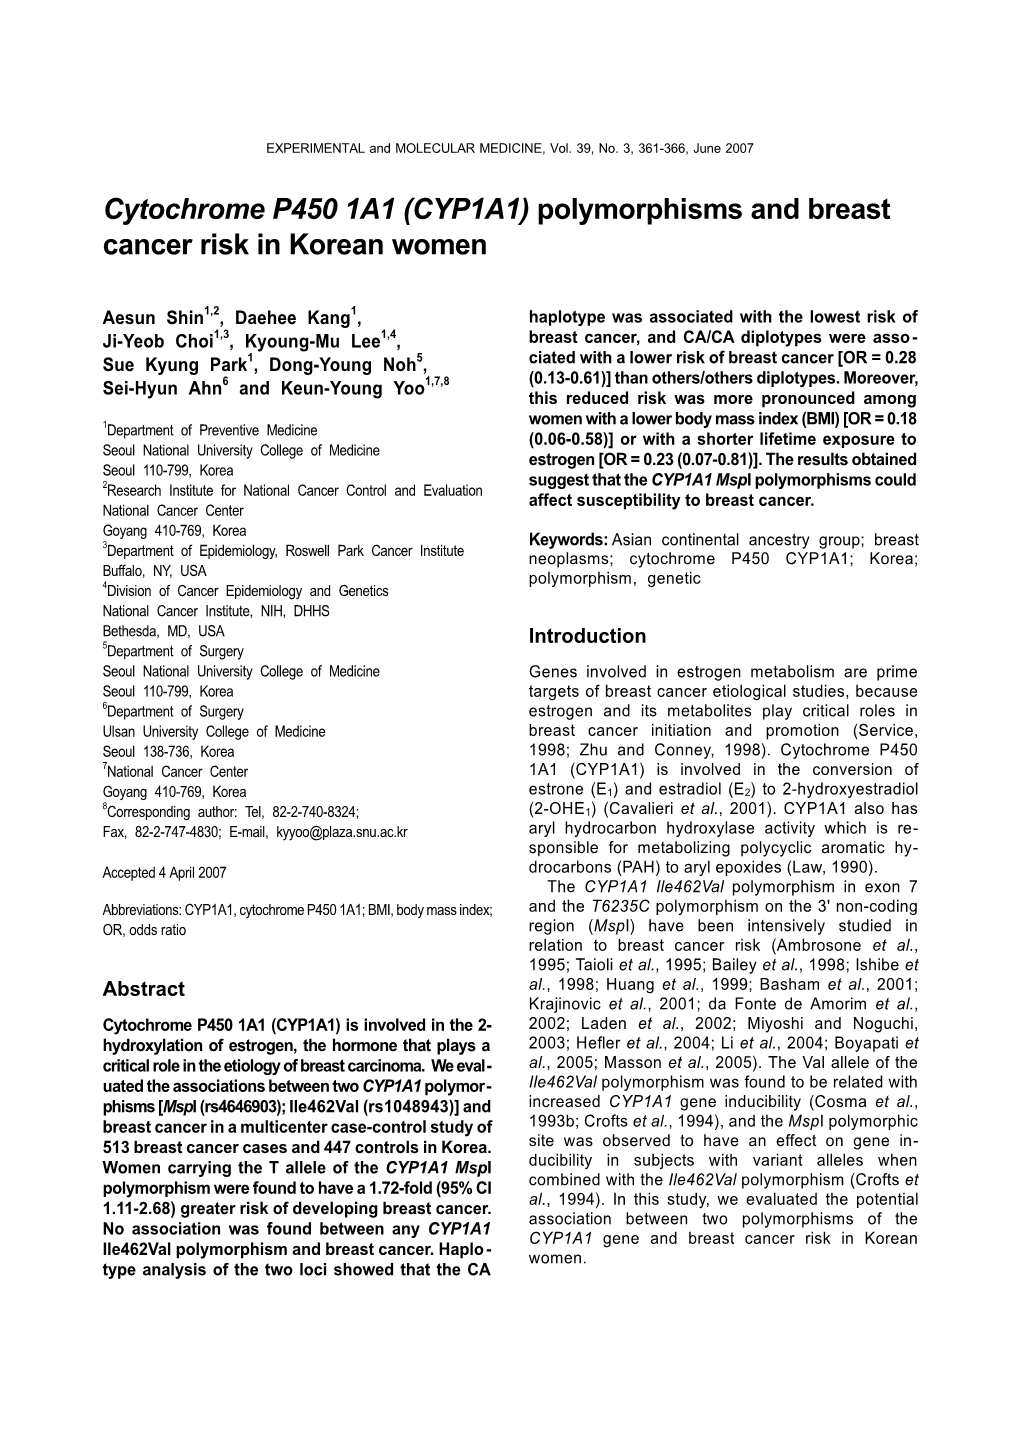 Cytochrome P450 1A1 (CYP1A1) Polymorphisms and Breast Cancer Risk in Korean Women